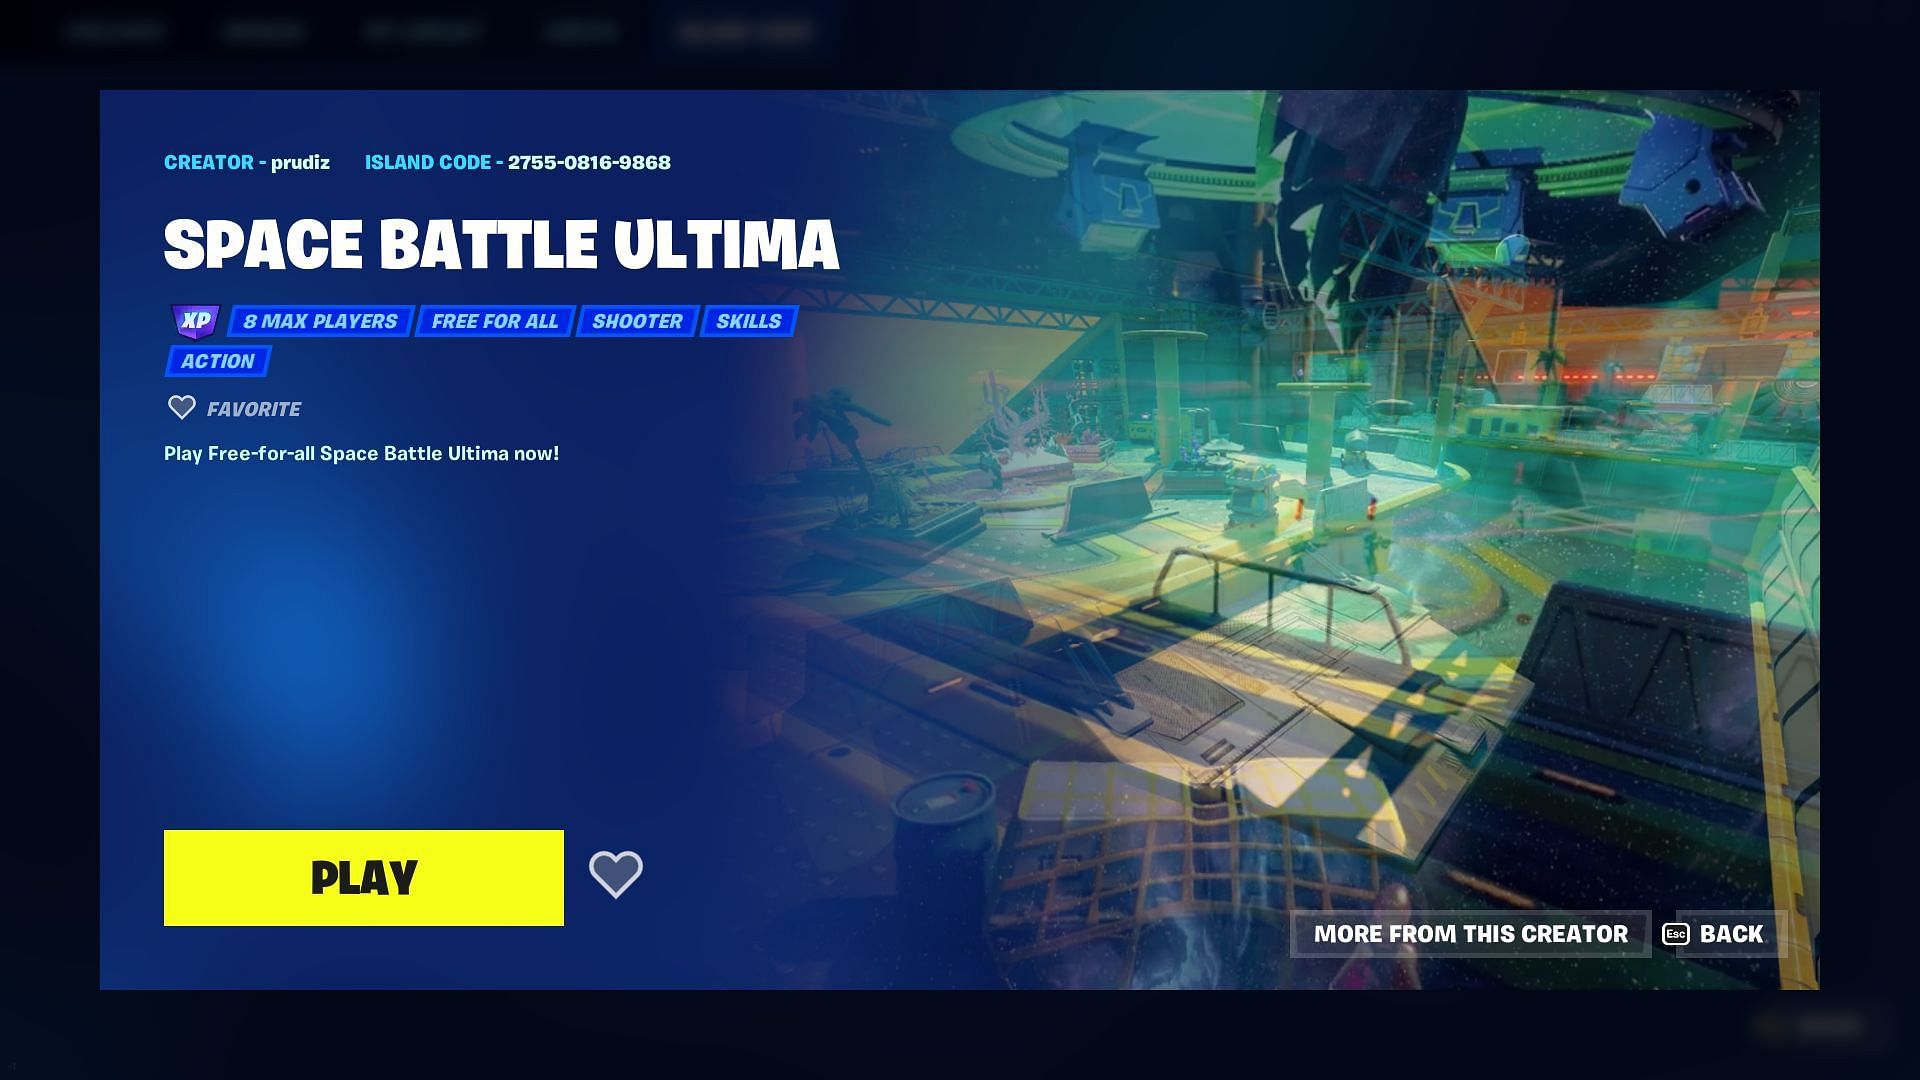 Use this map code to access the Creative Map: 2755-0816-9868 (Image via Epic Games/Fortnite)